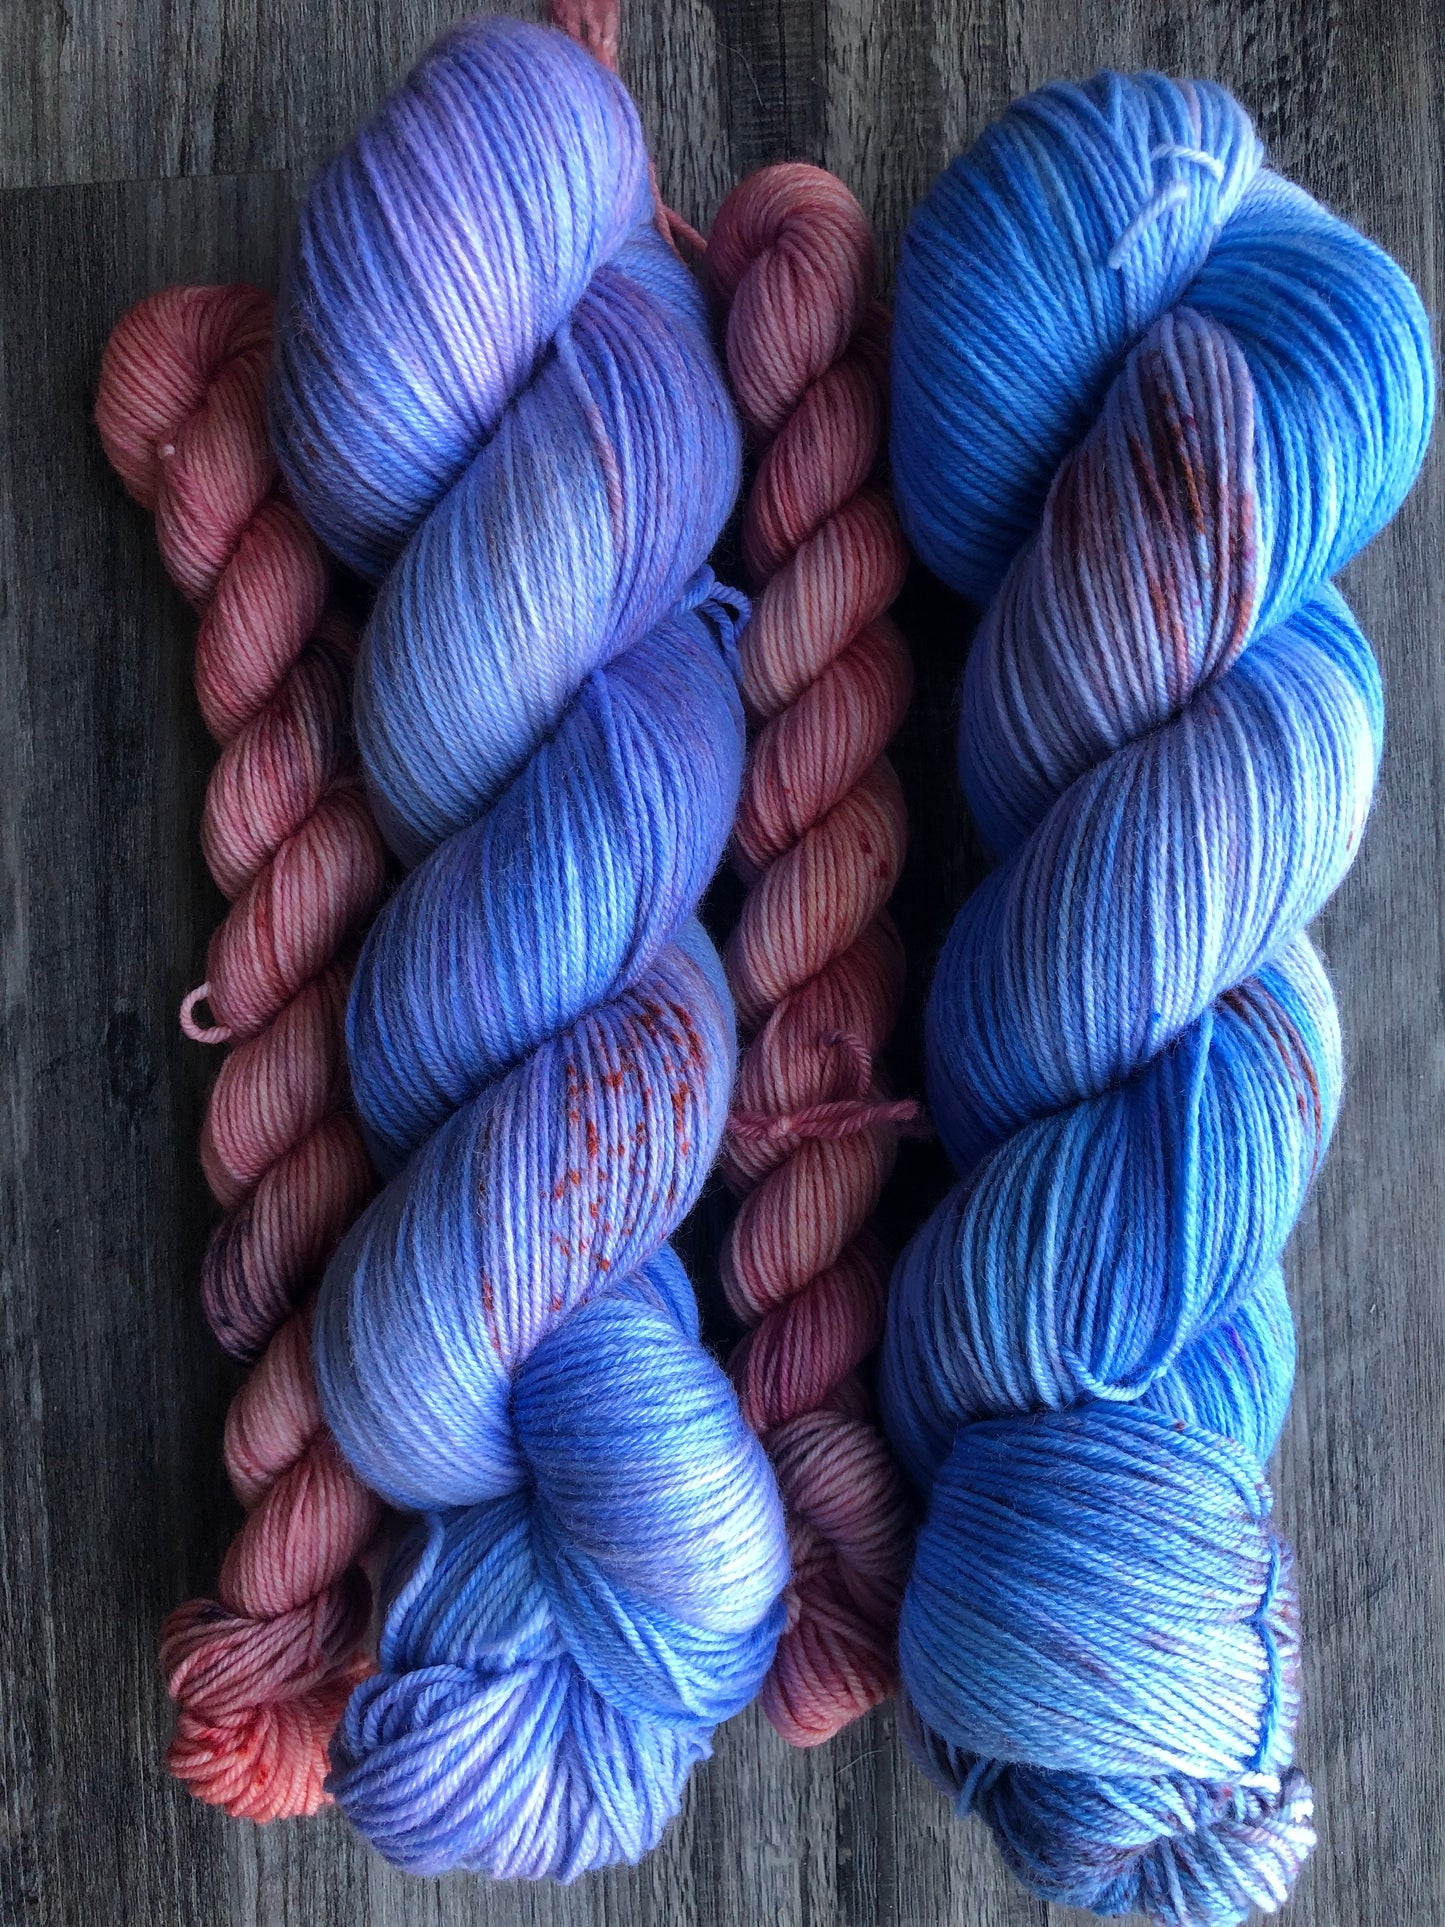 Monthly Sock Set - Hand dyed yarn club subscription. Pictures of previous month sock sets are shown.